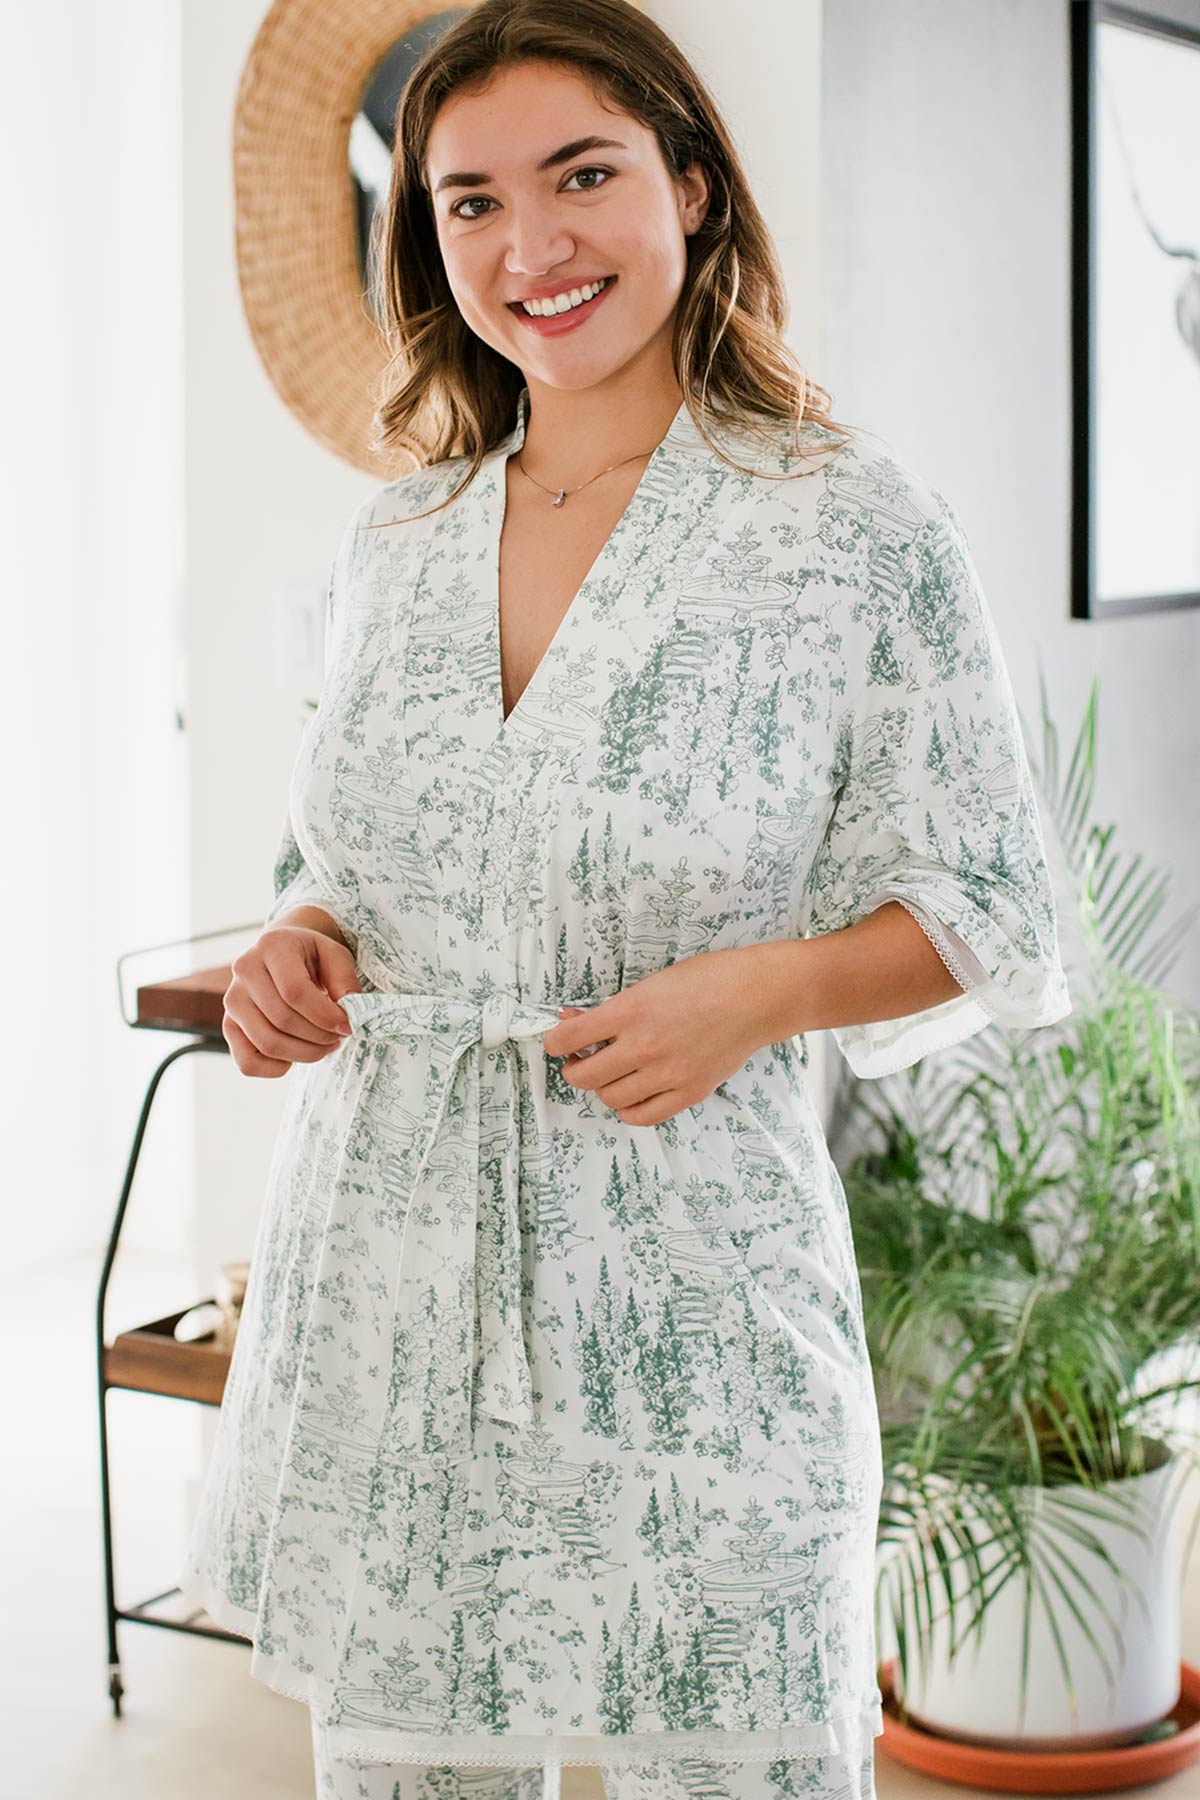 A woman standing with a smile on her face, her hands adjusting her robe's belt, wearing Iris Kimono Sleeve Belted Bamboo Lace Robe in English Garden Print